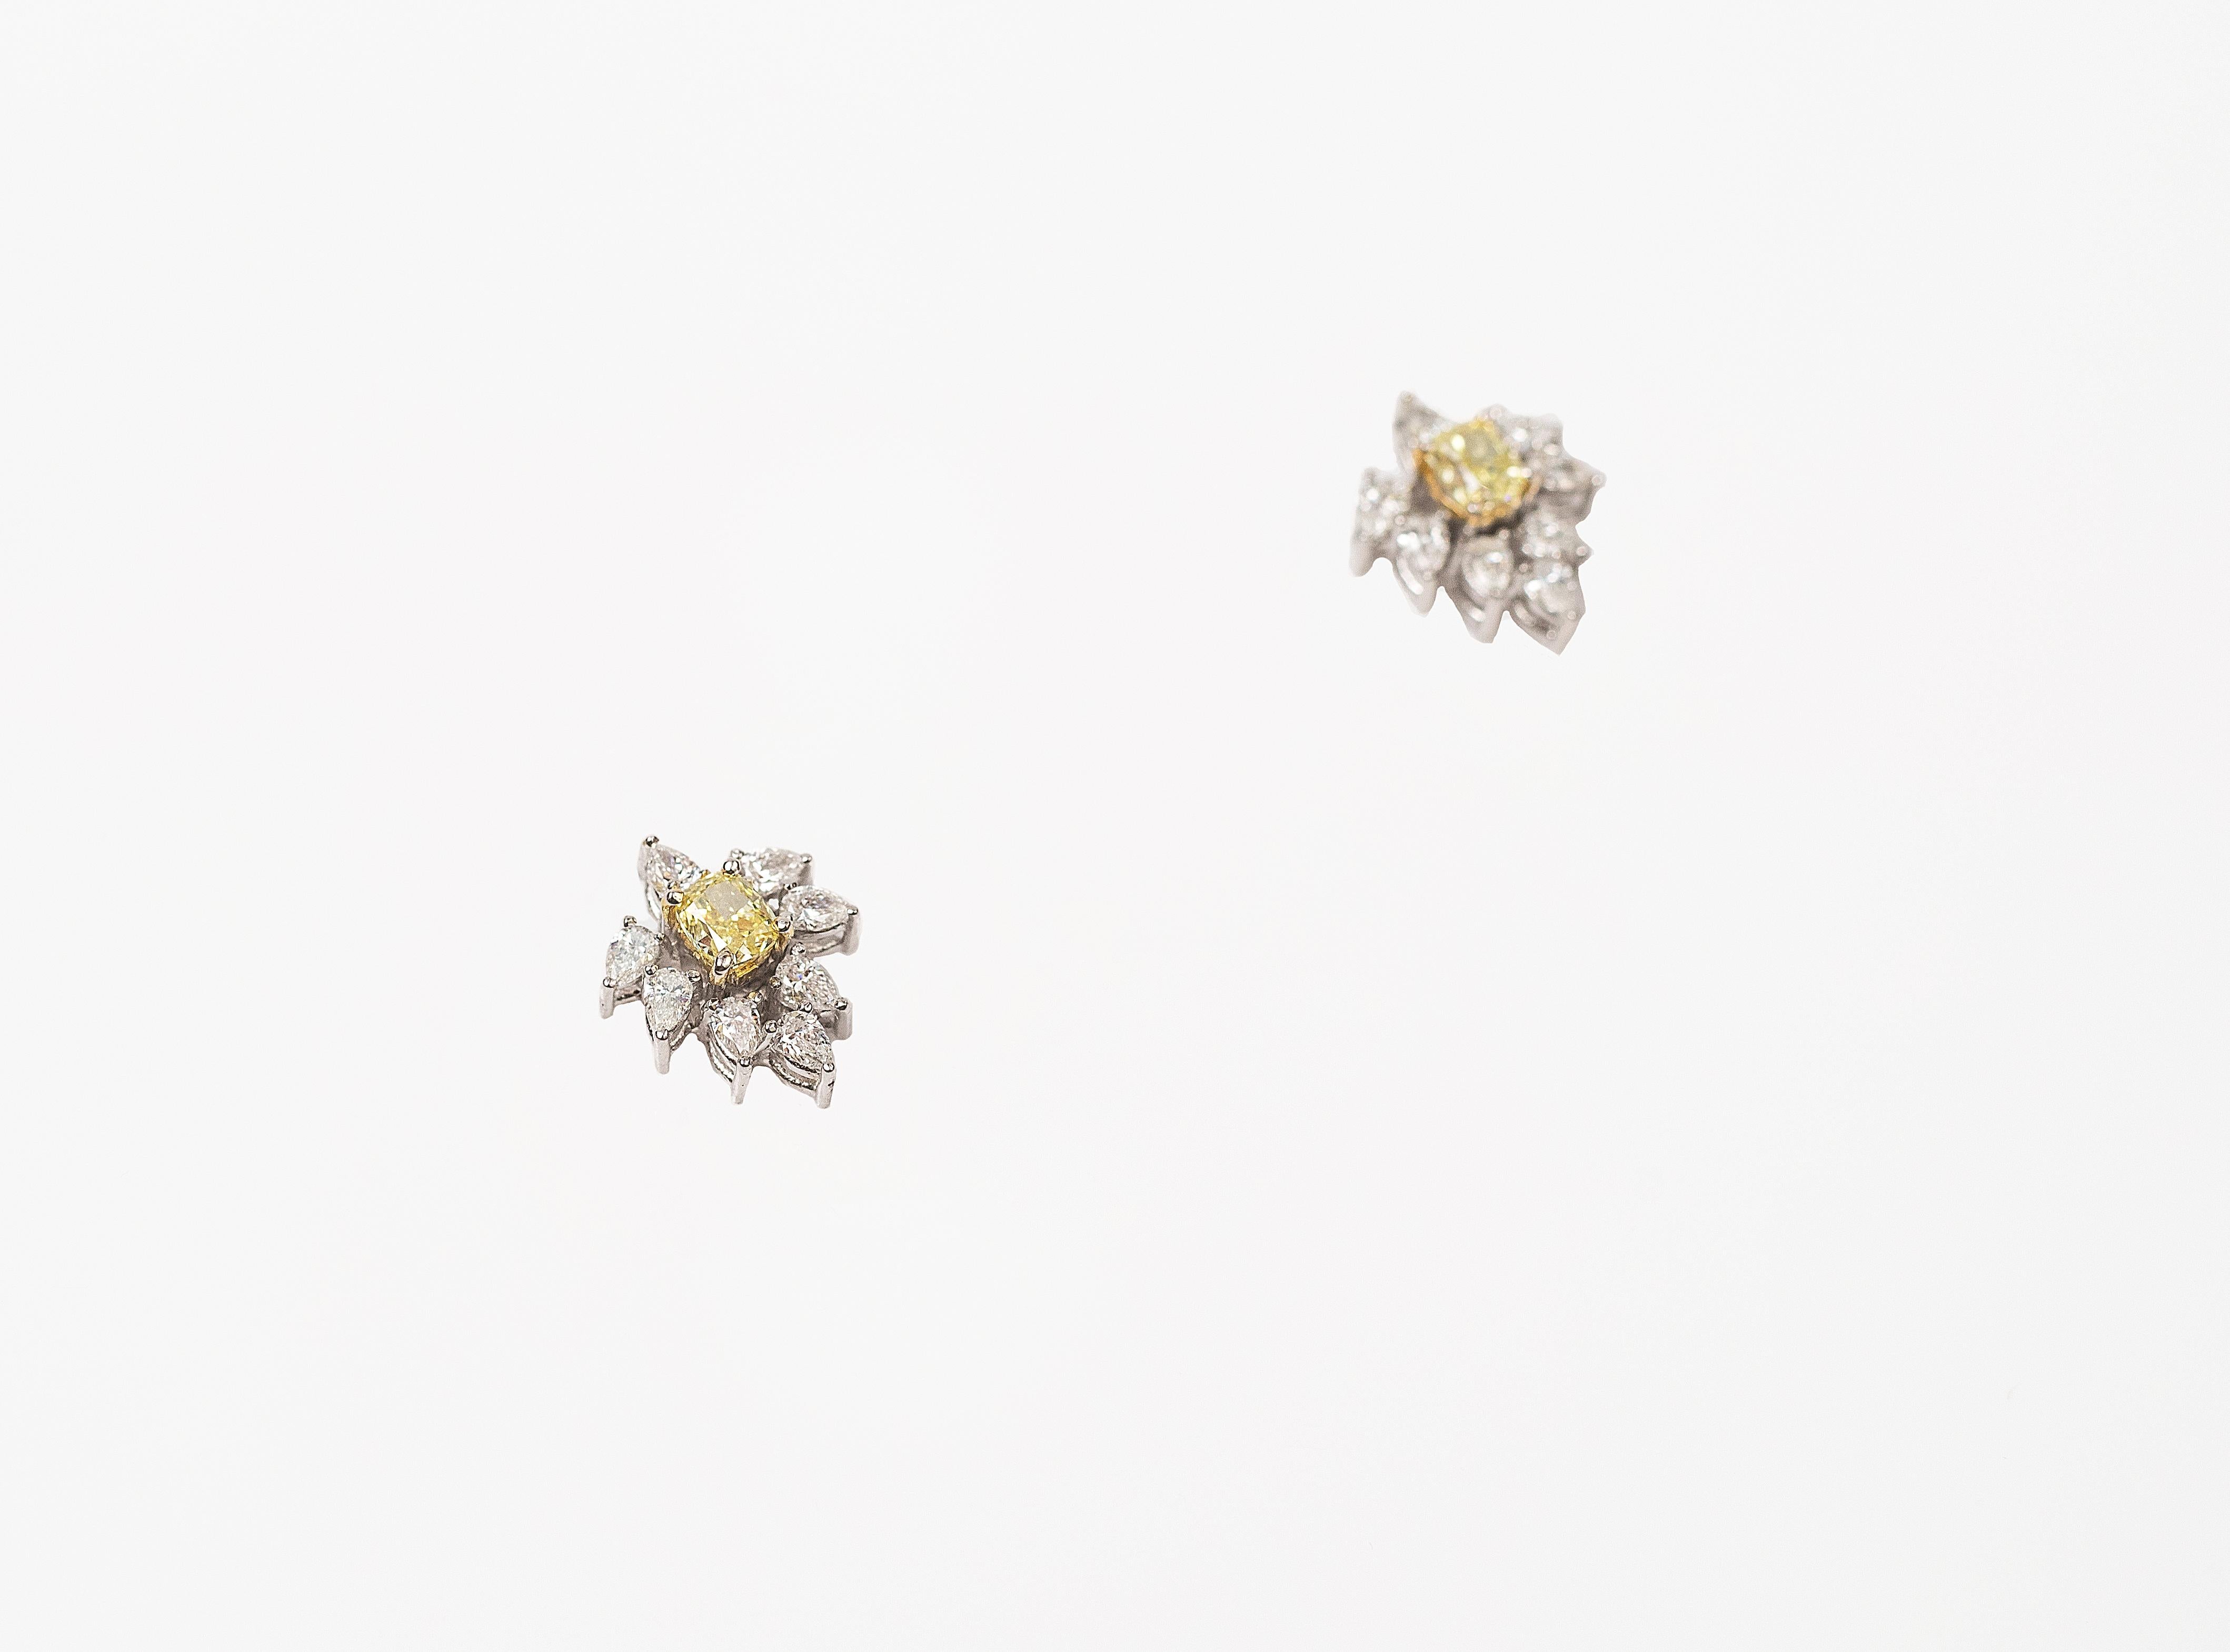 Handcrafted 18K Gold Earrings Studded with Natural Fancy Yellow Diamonds and Pear Shape Diamonds.
Gold Weight - 5.043 gms
Diamond Weight - 2.36 cts
Diamond Clarity - VS-Si
Diamond Colour - G-H & Fancy Yellow Diamond
Post and Clip System.

